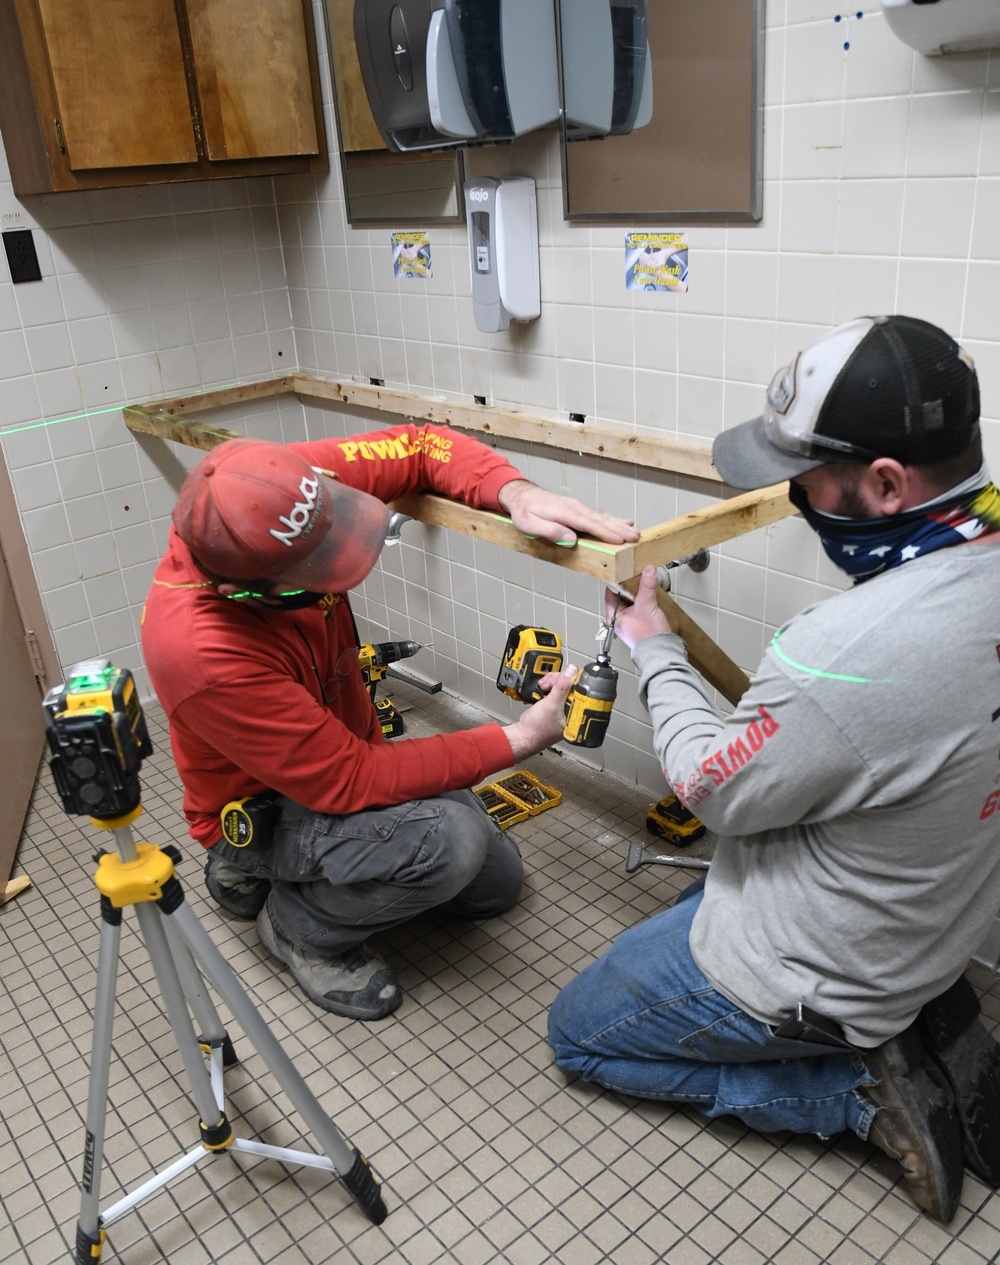 Fire station renovations bring comfort and joy to Fort Drum firefighters this holiday season